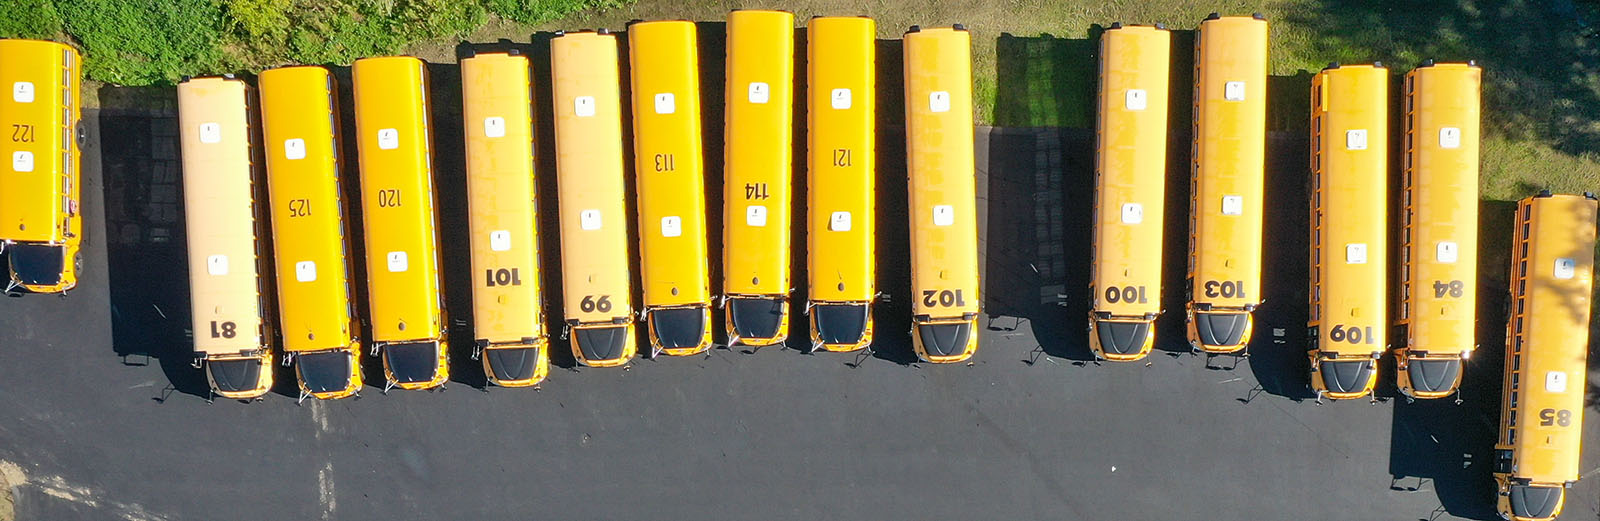 Bright yellow school buses lined up in a parking lot.